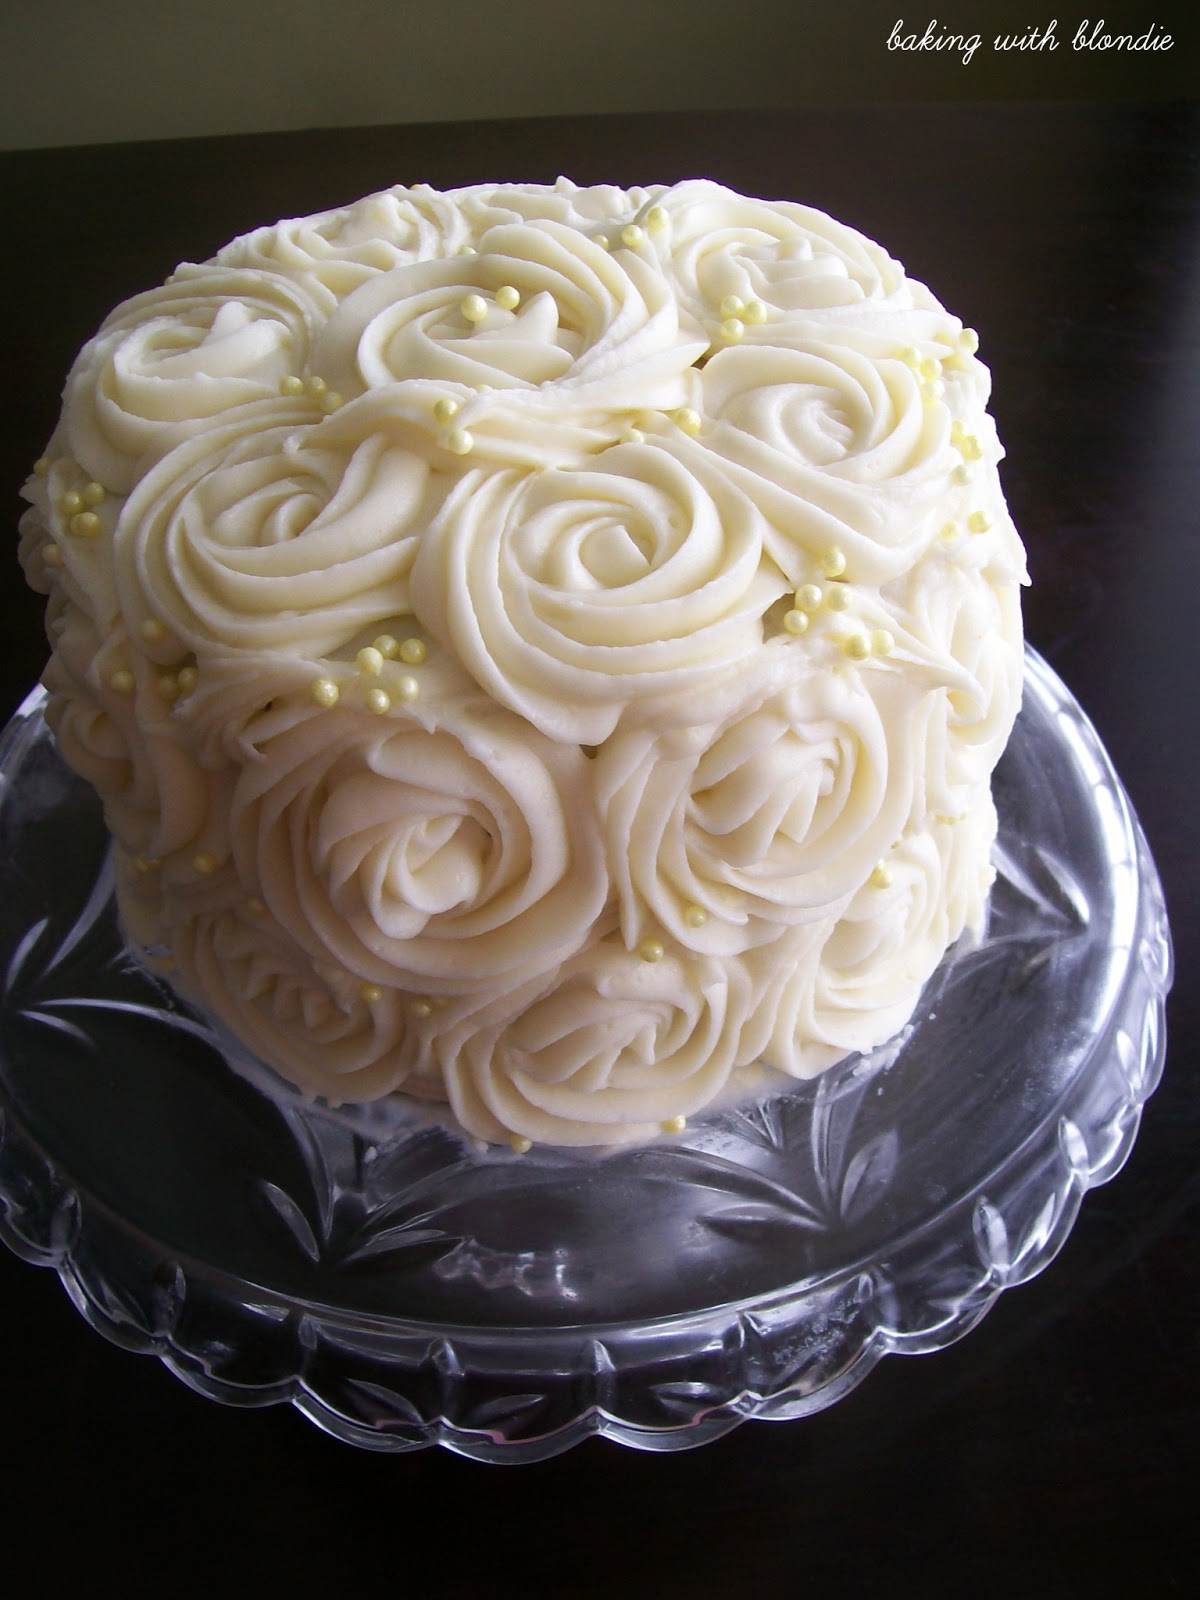 Rosette Cake with Frosting